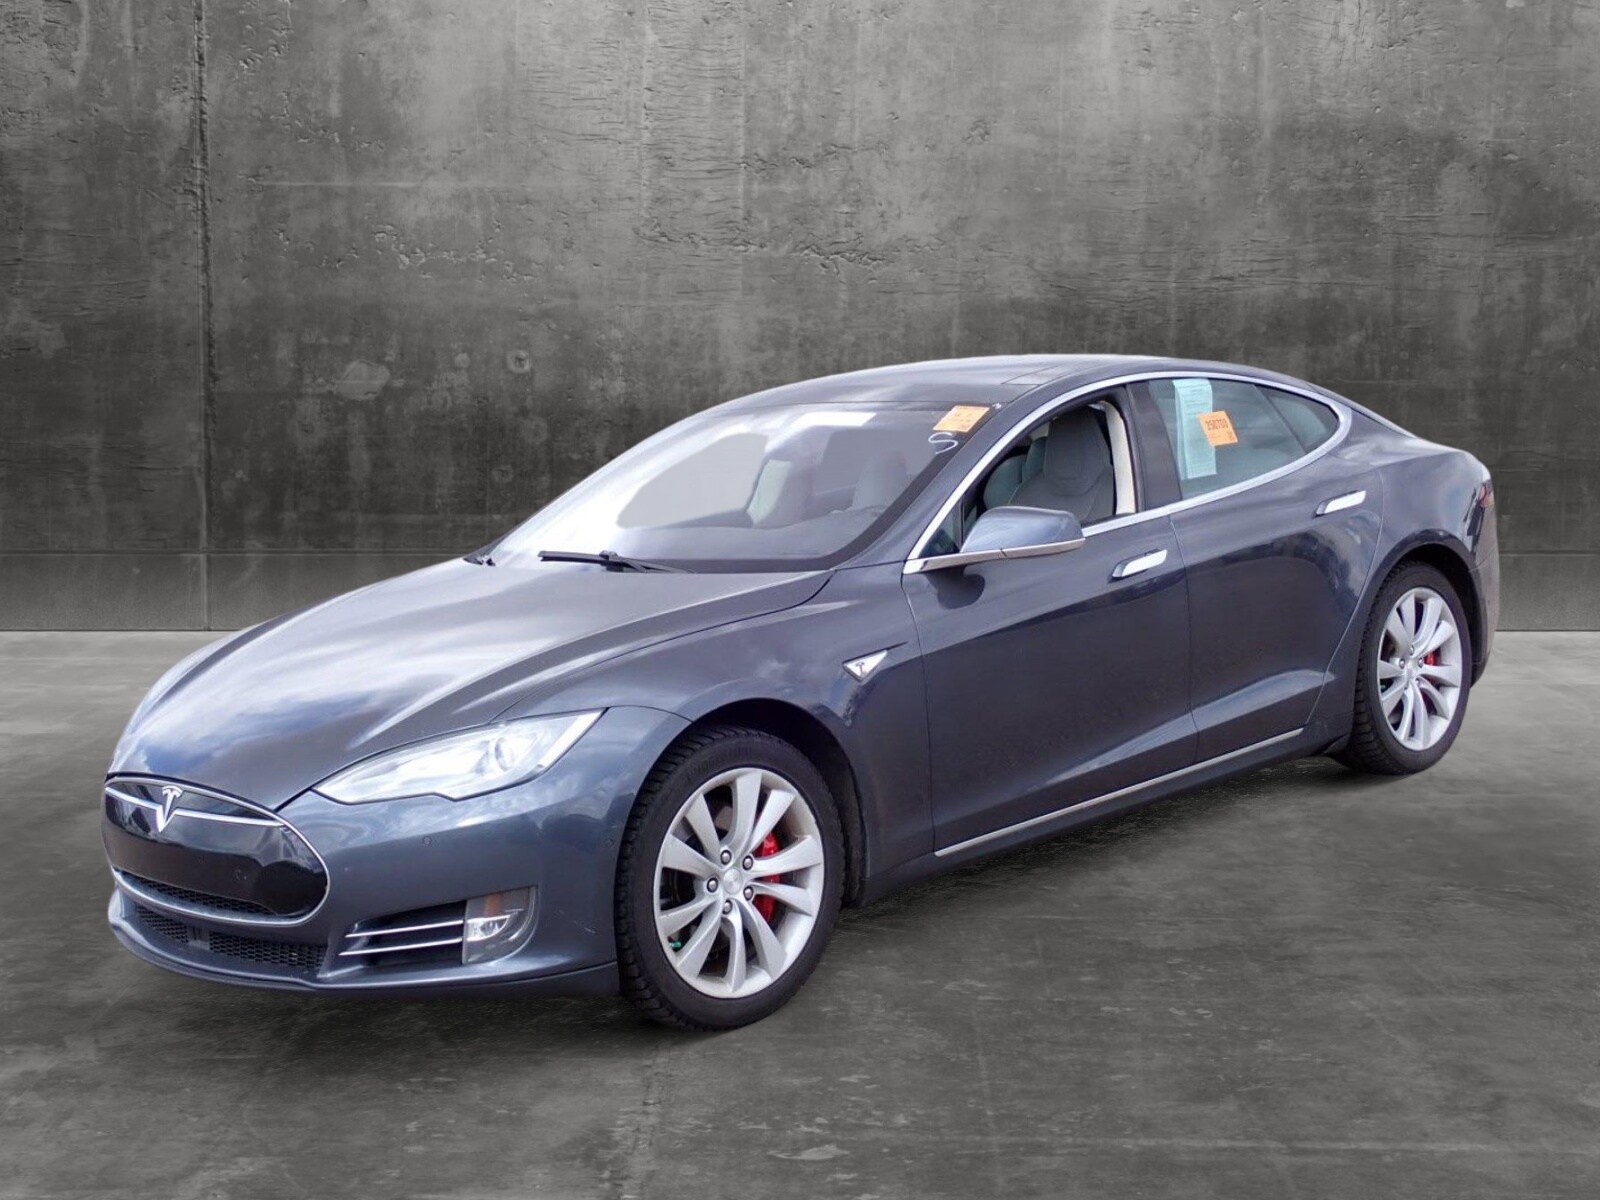 Used 2014 Tesla Model S S with VIN 5YJSA1H13EFP56861 for sale in Centennial, CO